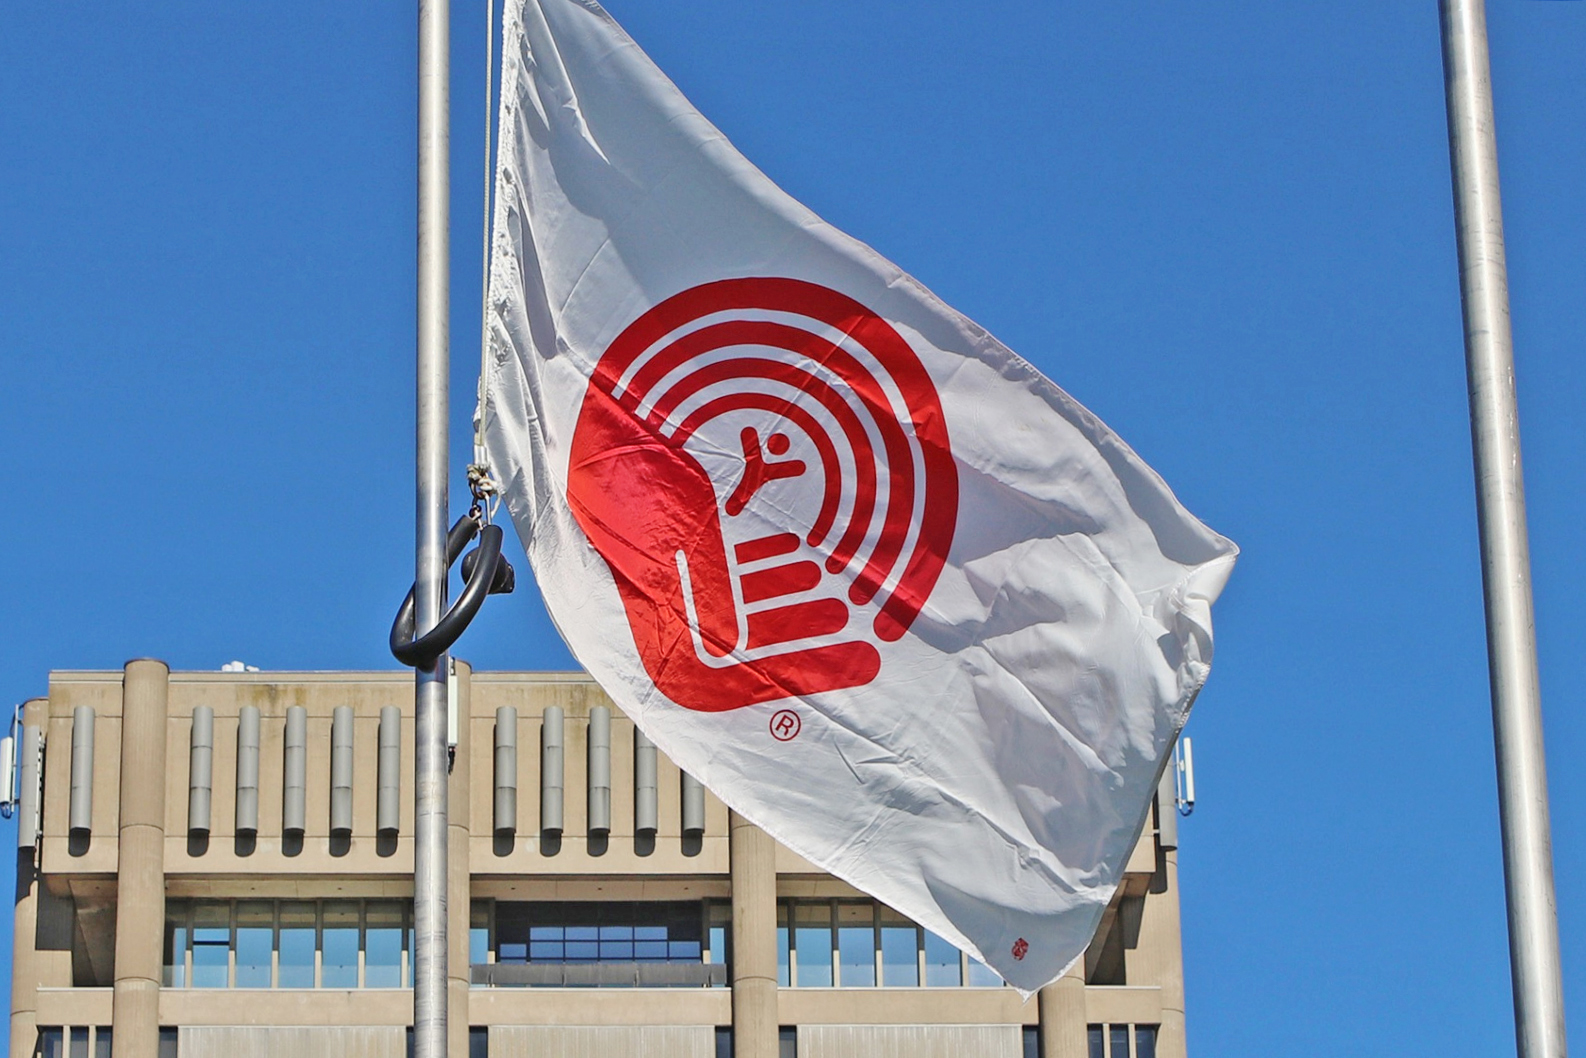 The United Way flag flies in front of Brock University’s Schmon Tower. The flag is white with the red United Way logo, which looks like a hand holding a stick figure while a rainbow arches over the figure. Only the top of the Schmon Tower building is visible in the background. A clear blue sky takes up the rest of the frame.